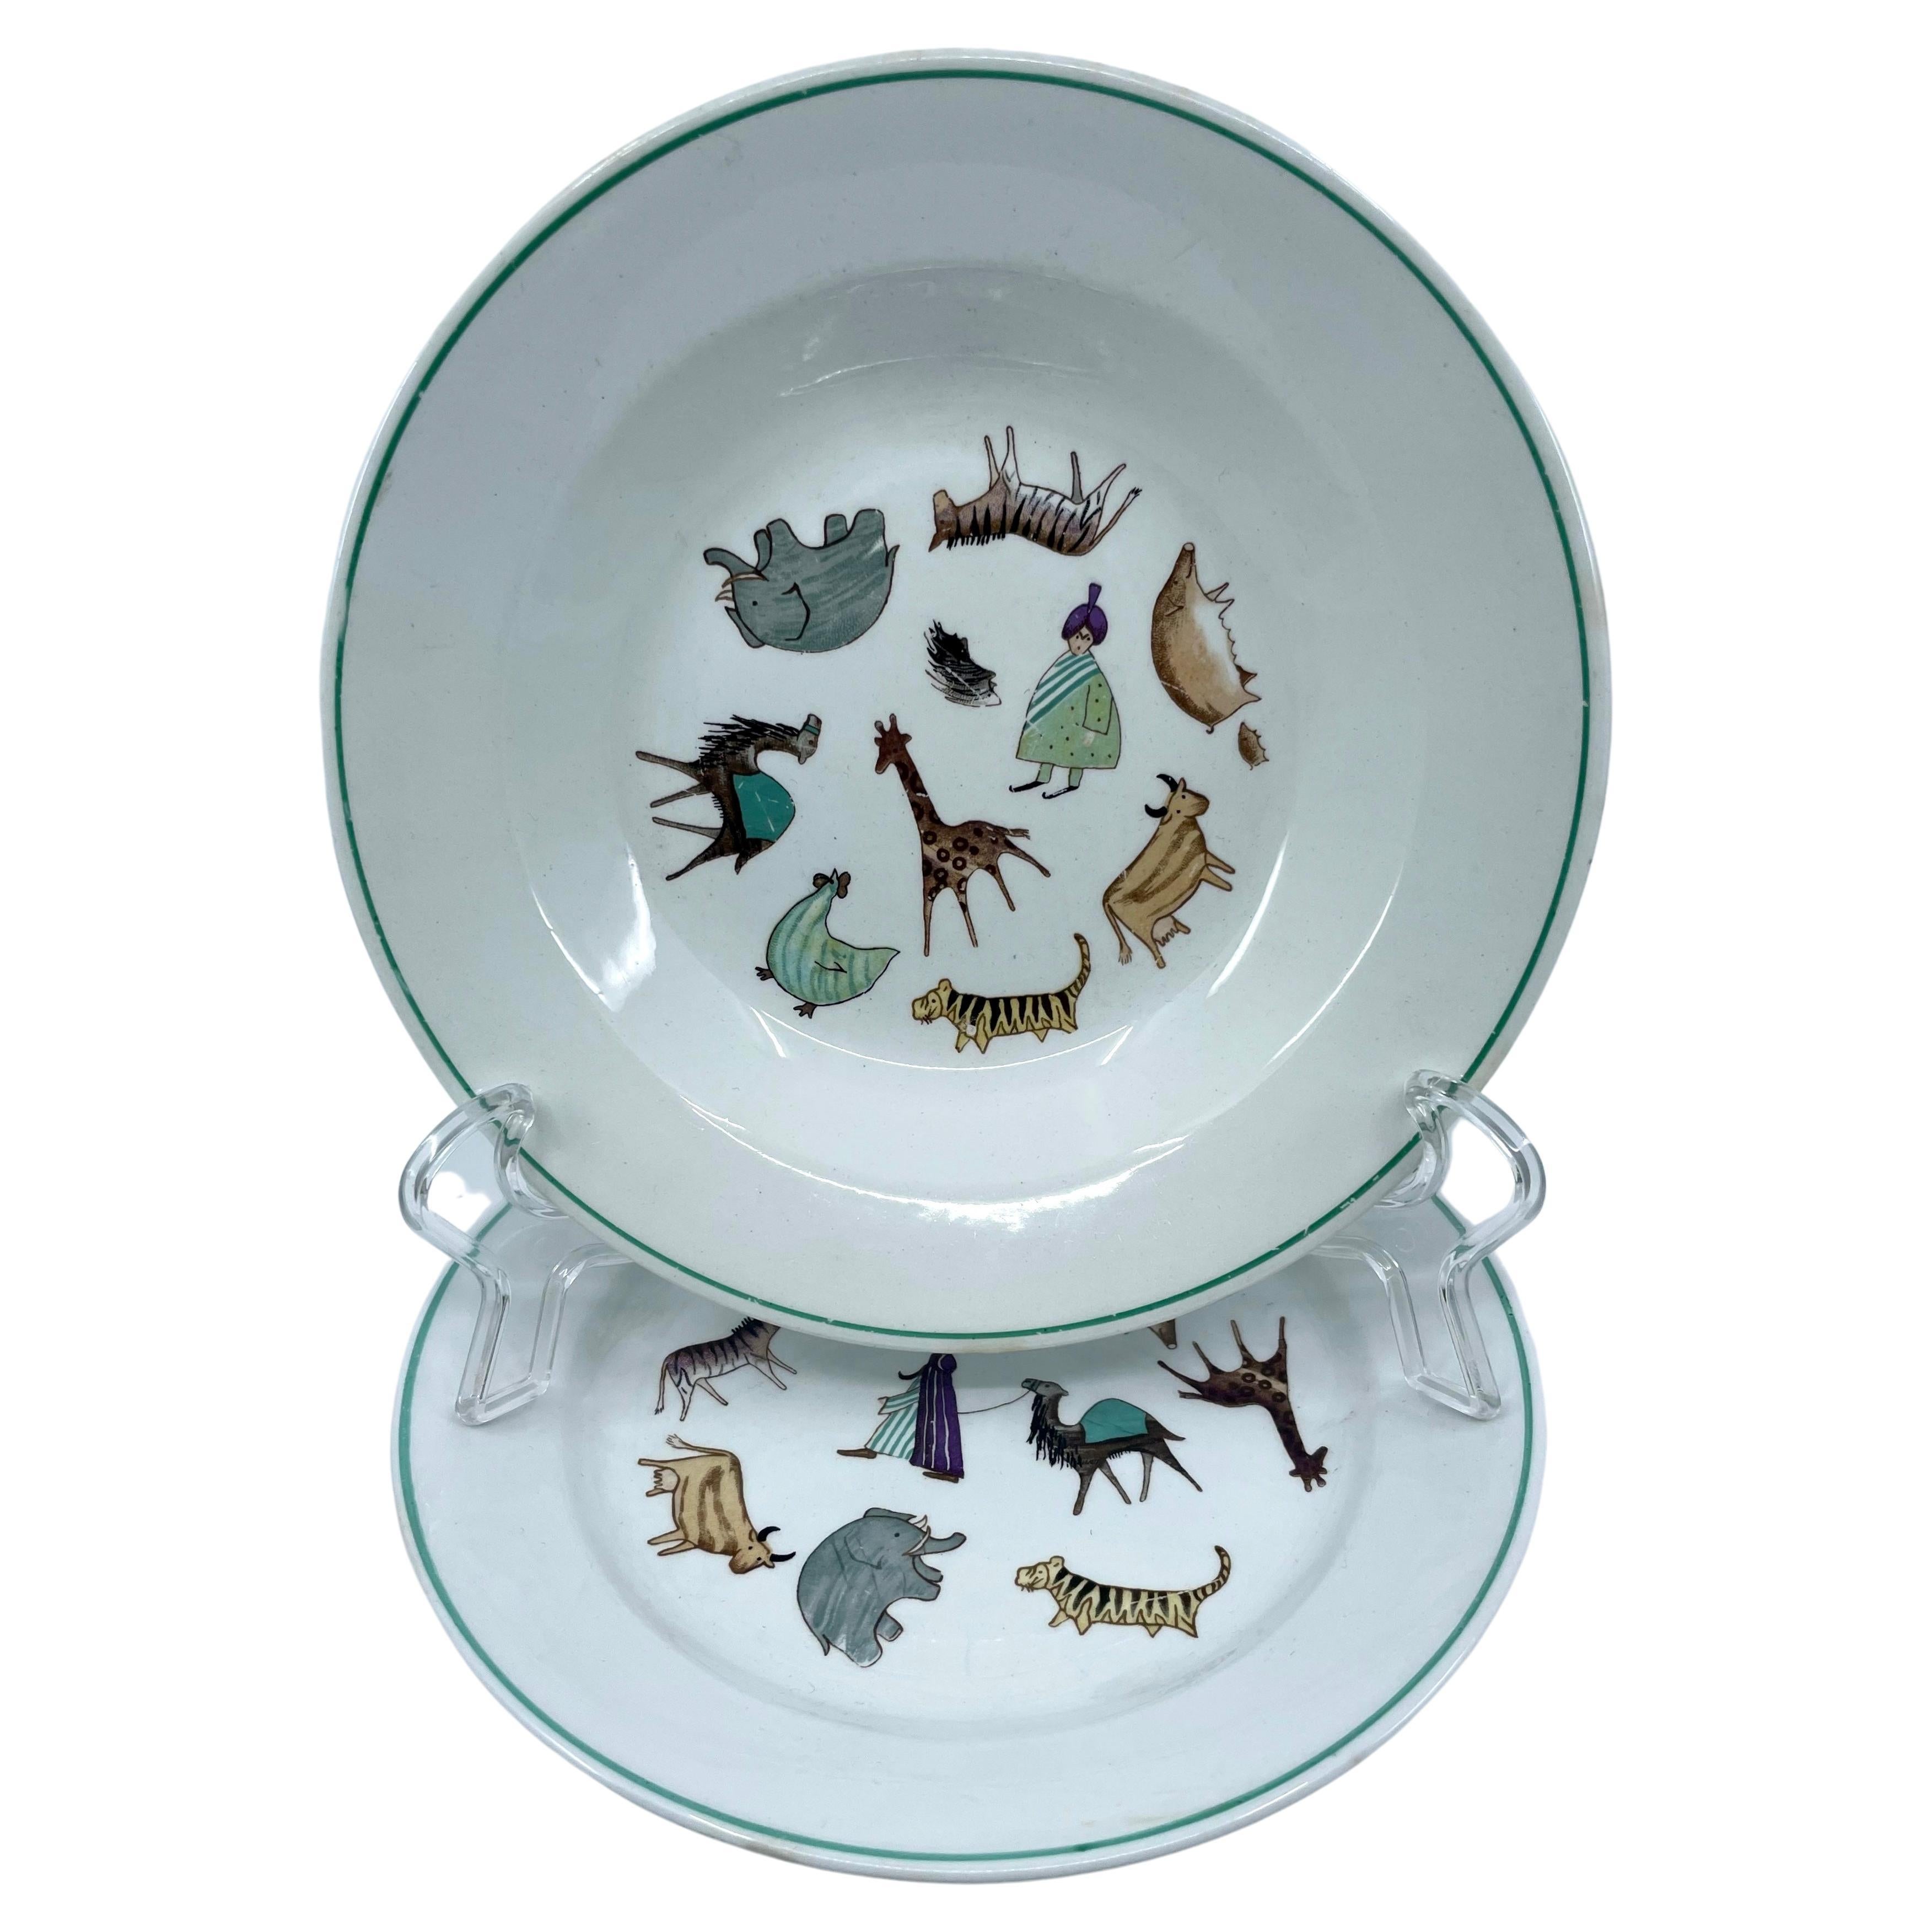 Animal Parade Child's Plate and Bowl Set For Sale